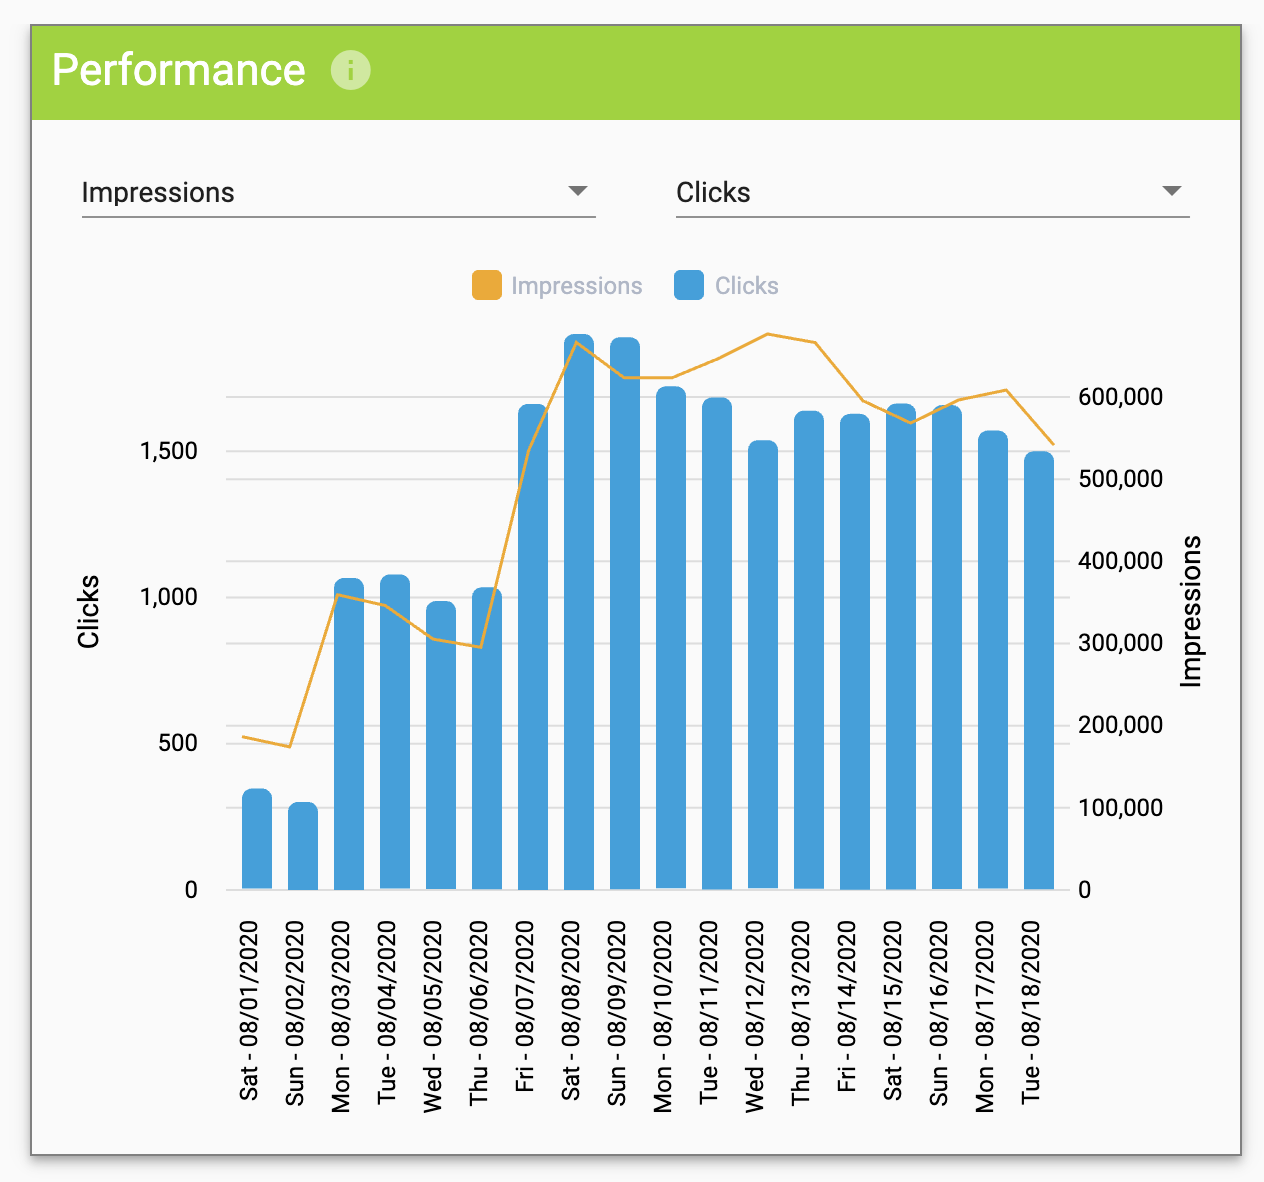 Dashboard daily performance graph click vs impressions